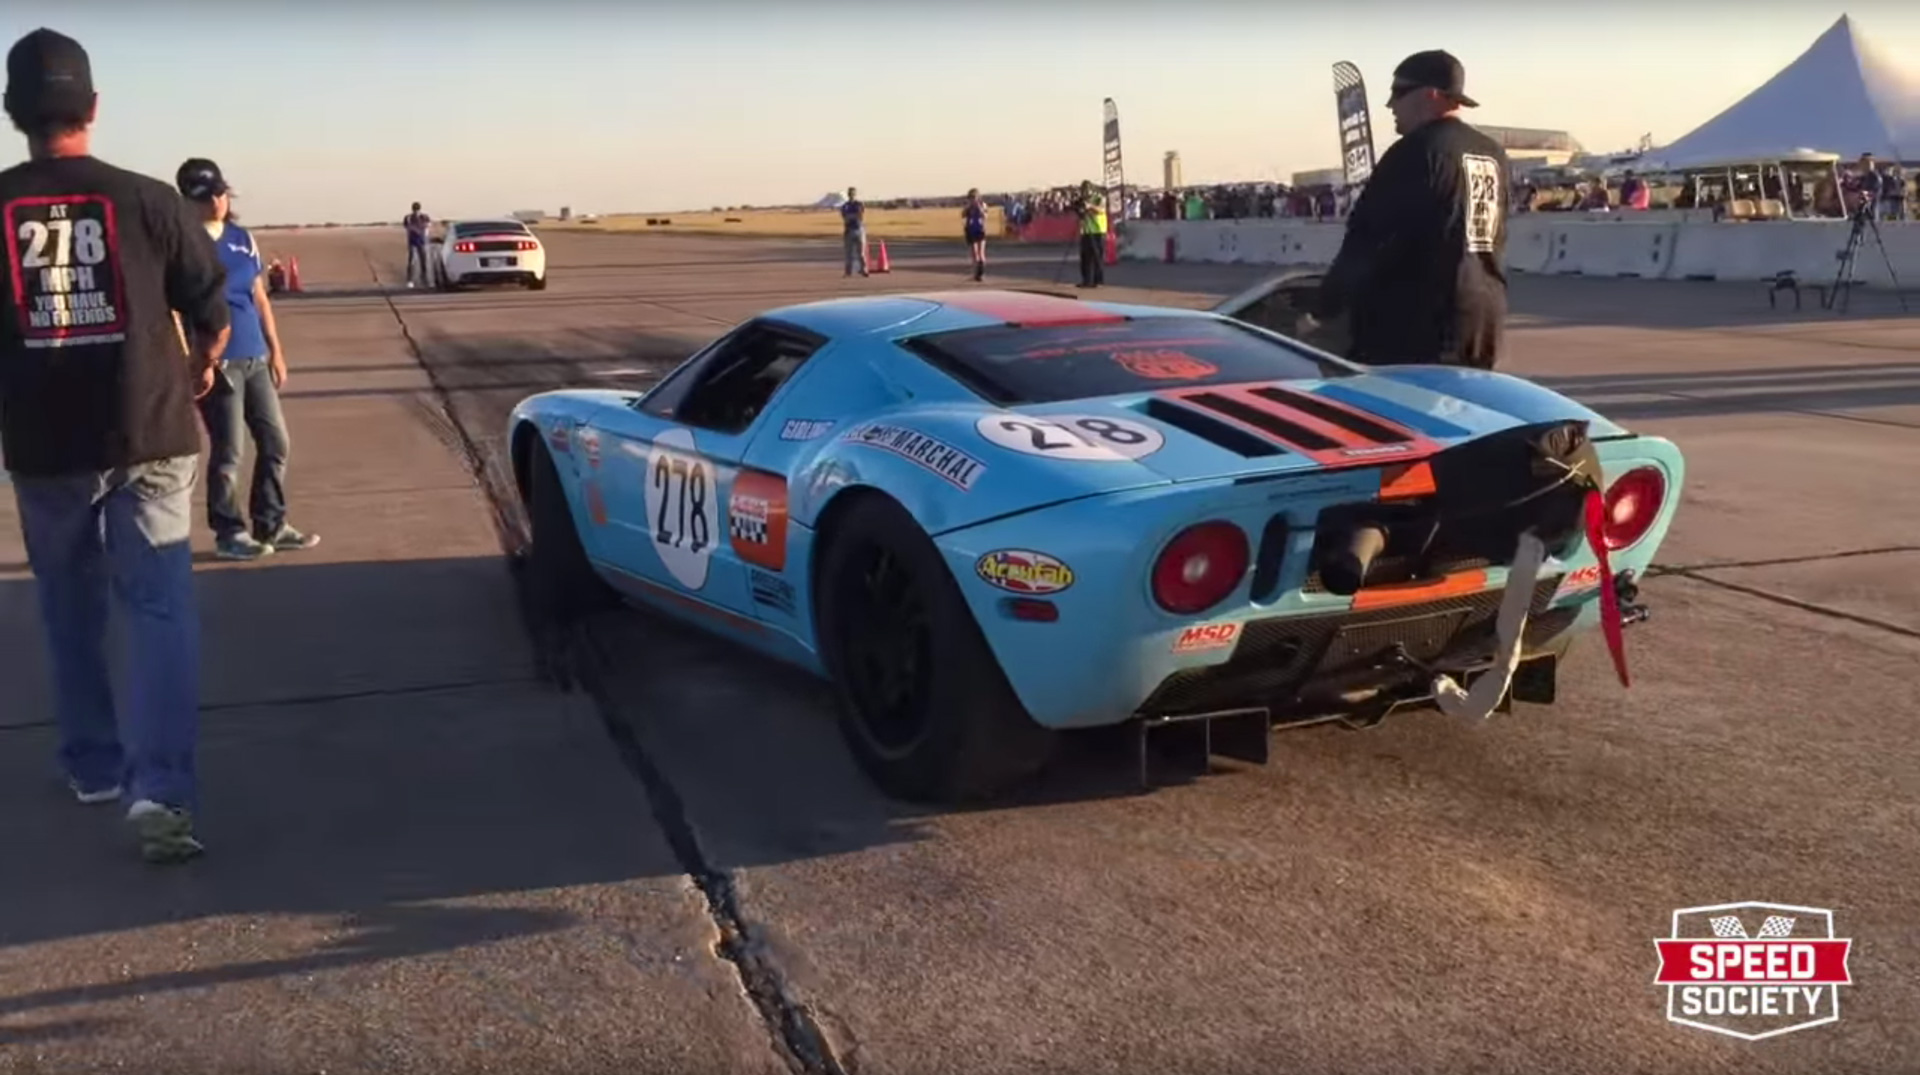 Ford GT Breaks The Texas Mile Record At 279.9 MPH